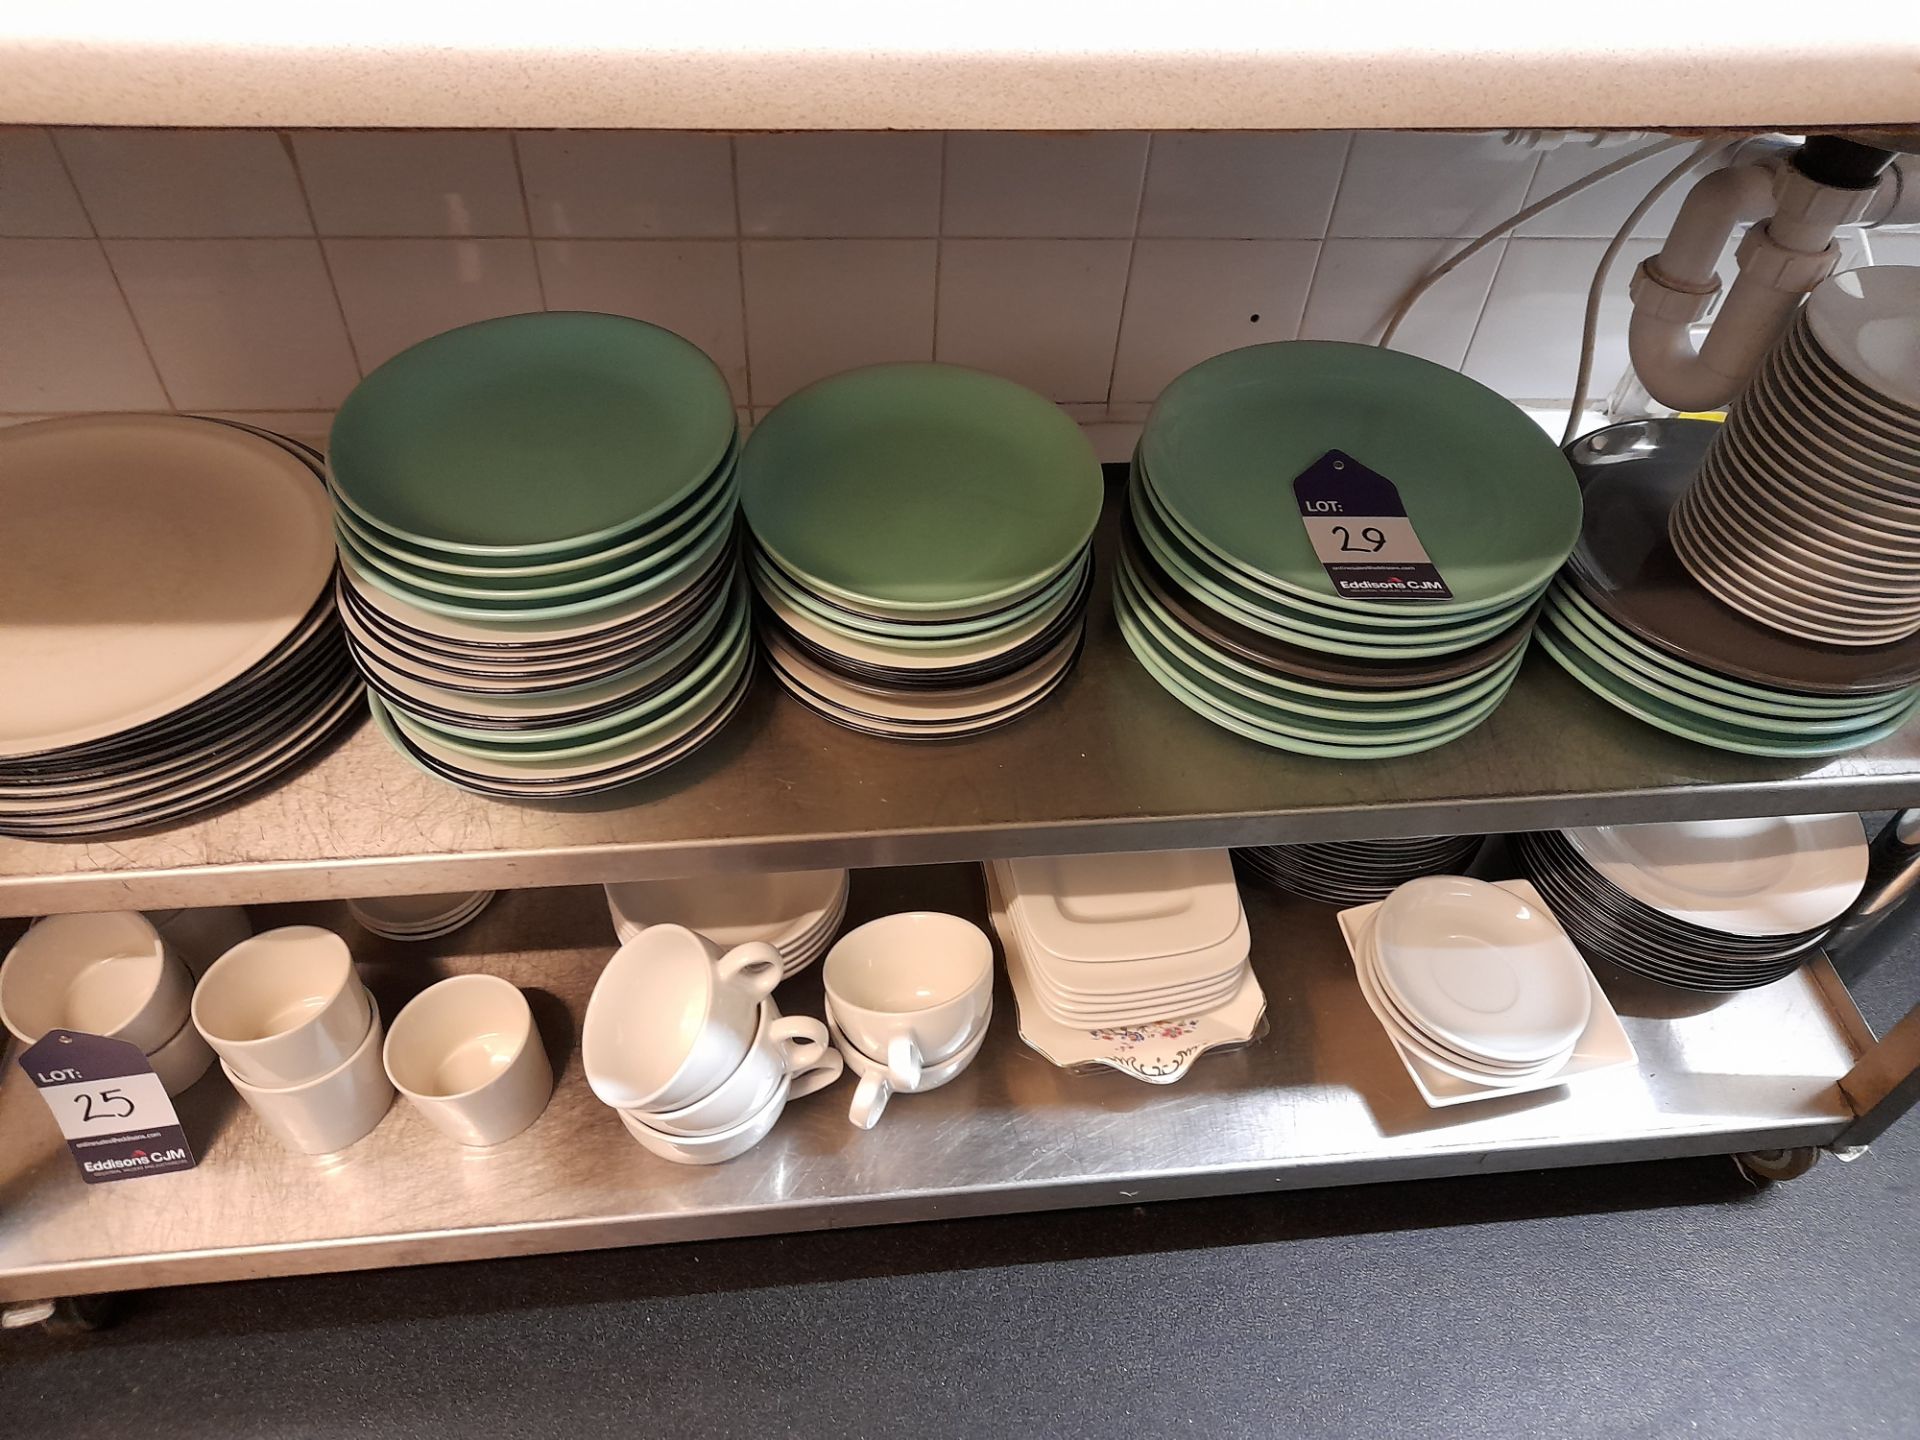 Assortment of crockery to trolley, to include plates, cups, saucers, etc